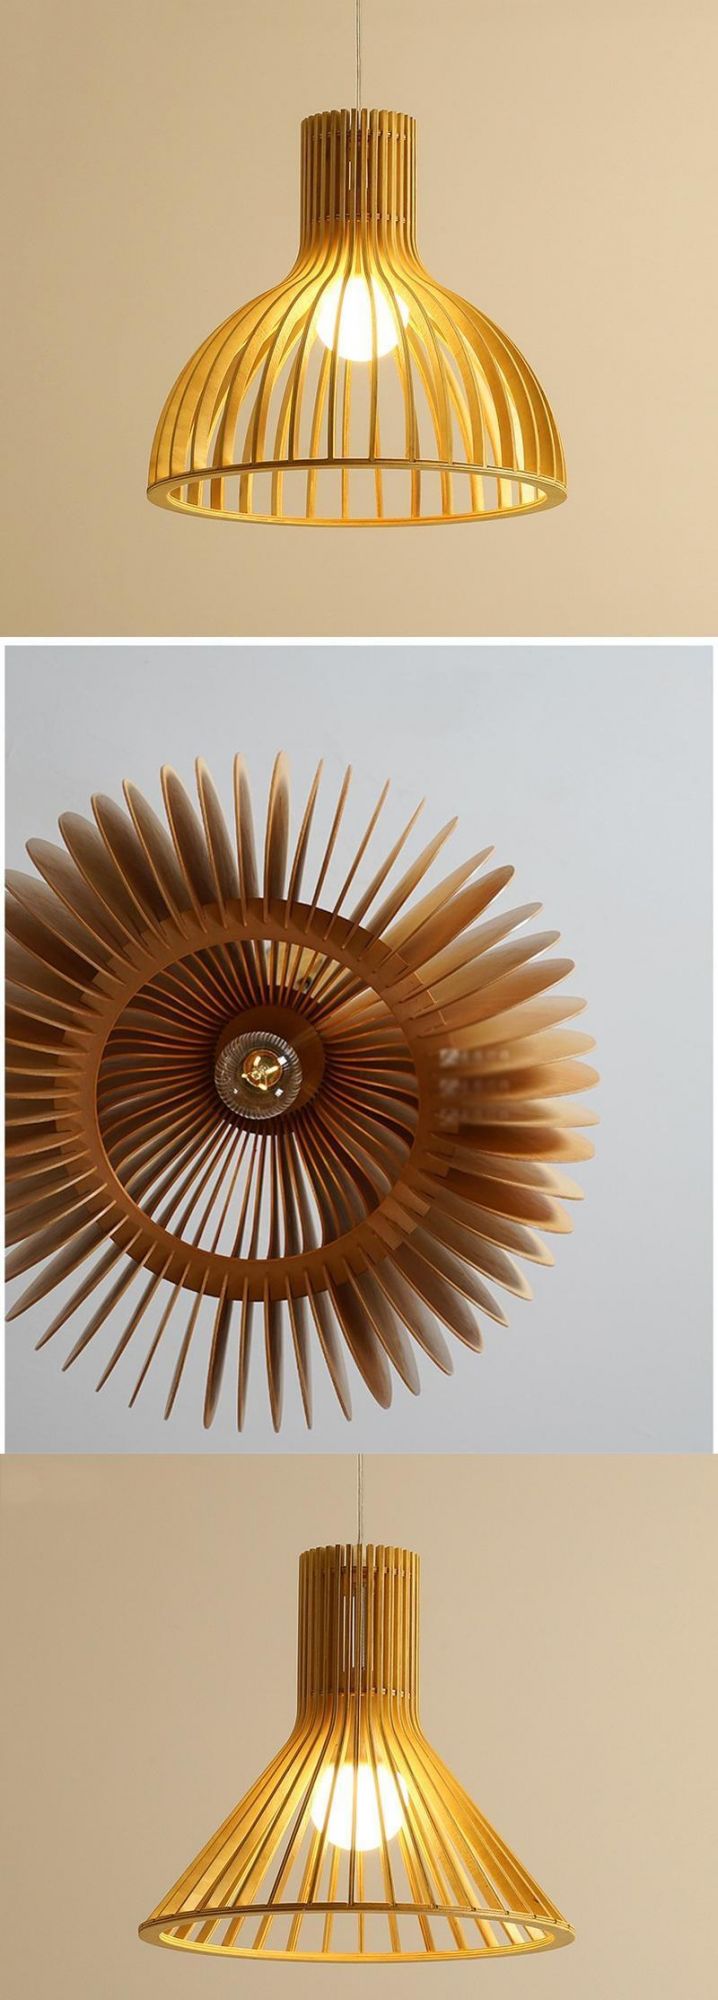 Classic Bamboo Chandelier Woven Bamboo Light Bamboo Hanging Lamp